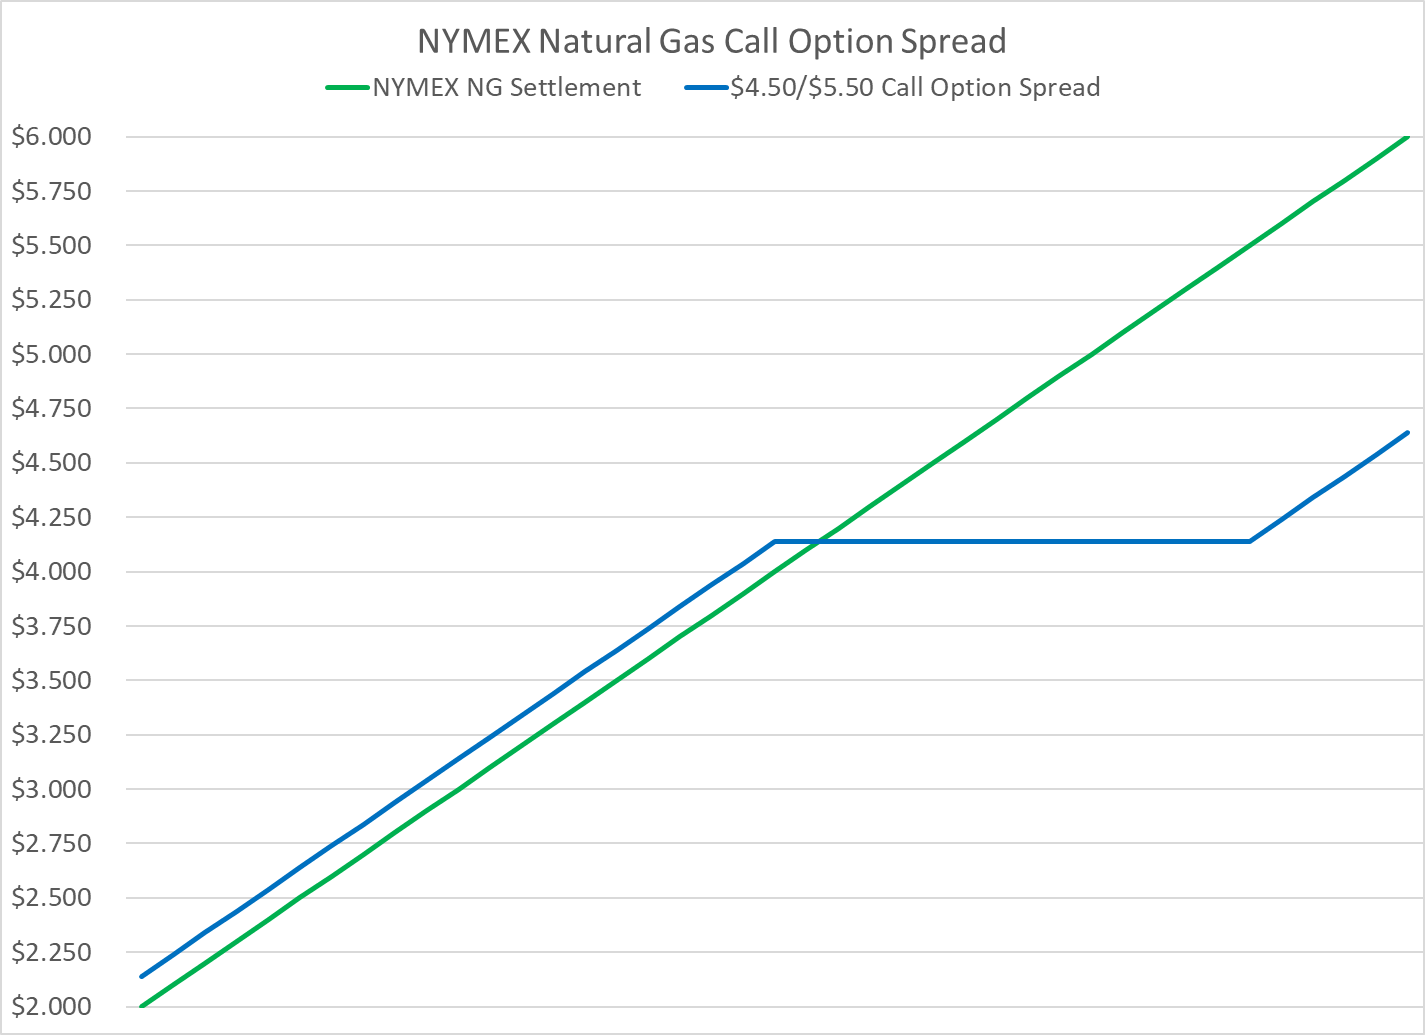 NYMEX-natural-gas-bull-call-option-spread-example